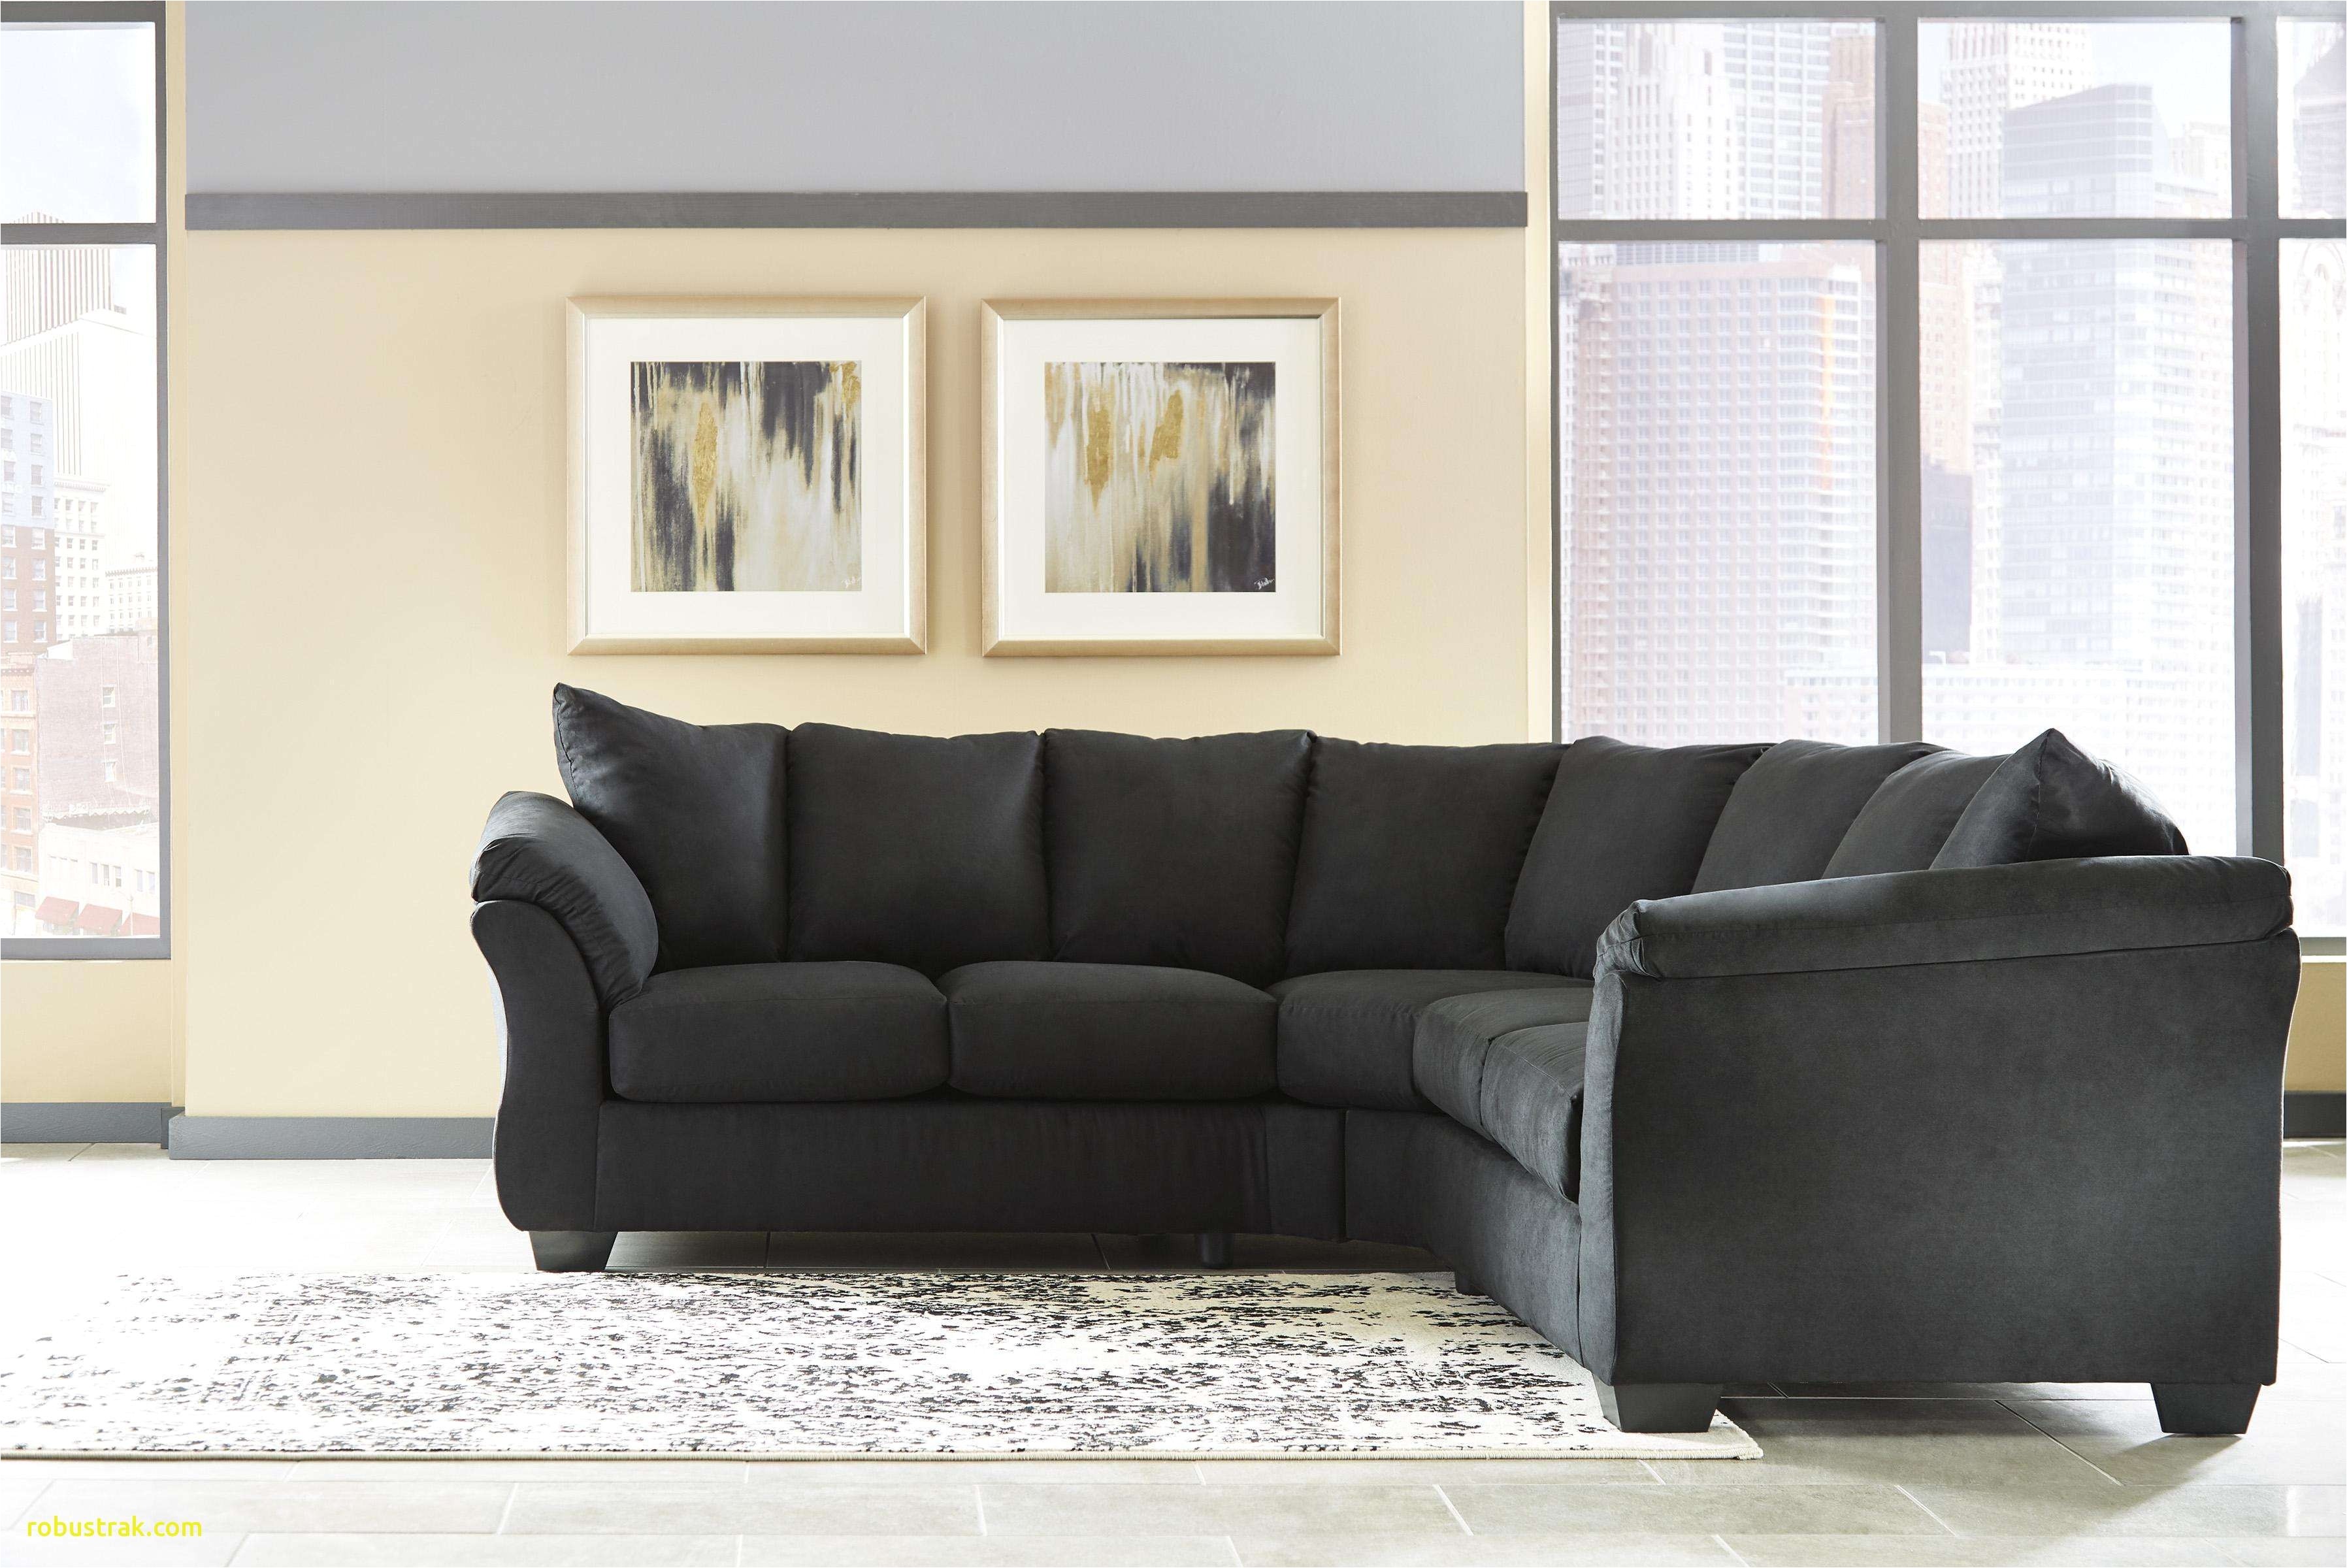 Sectional sofas Under 500 Dollars Cool Sectionals Inspirational Furniture Cool Small Sectional sofa